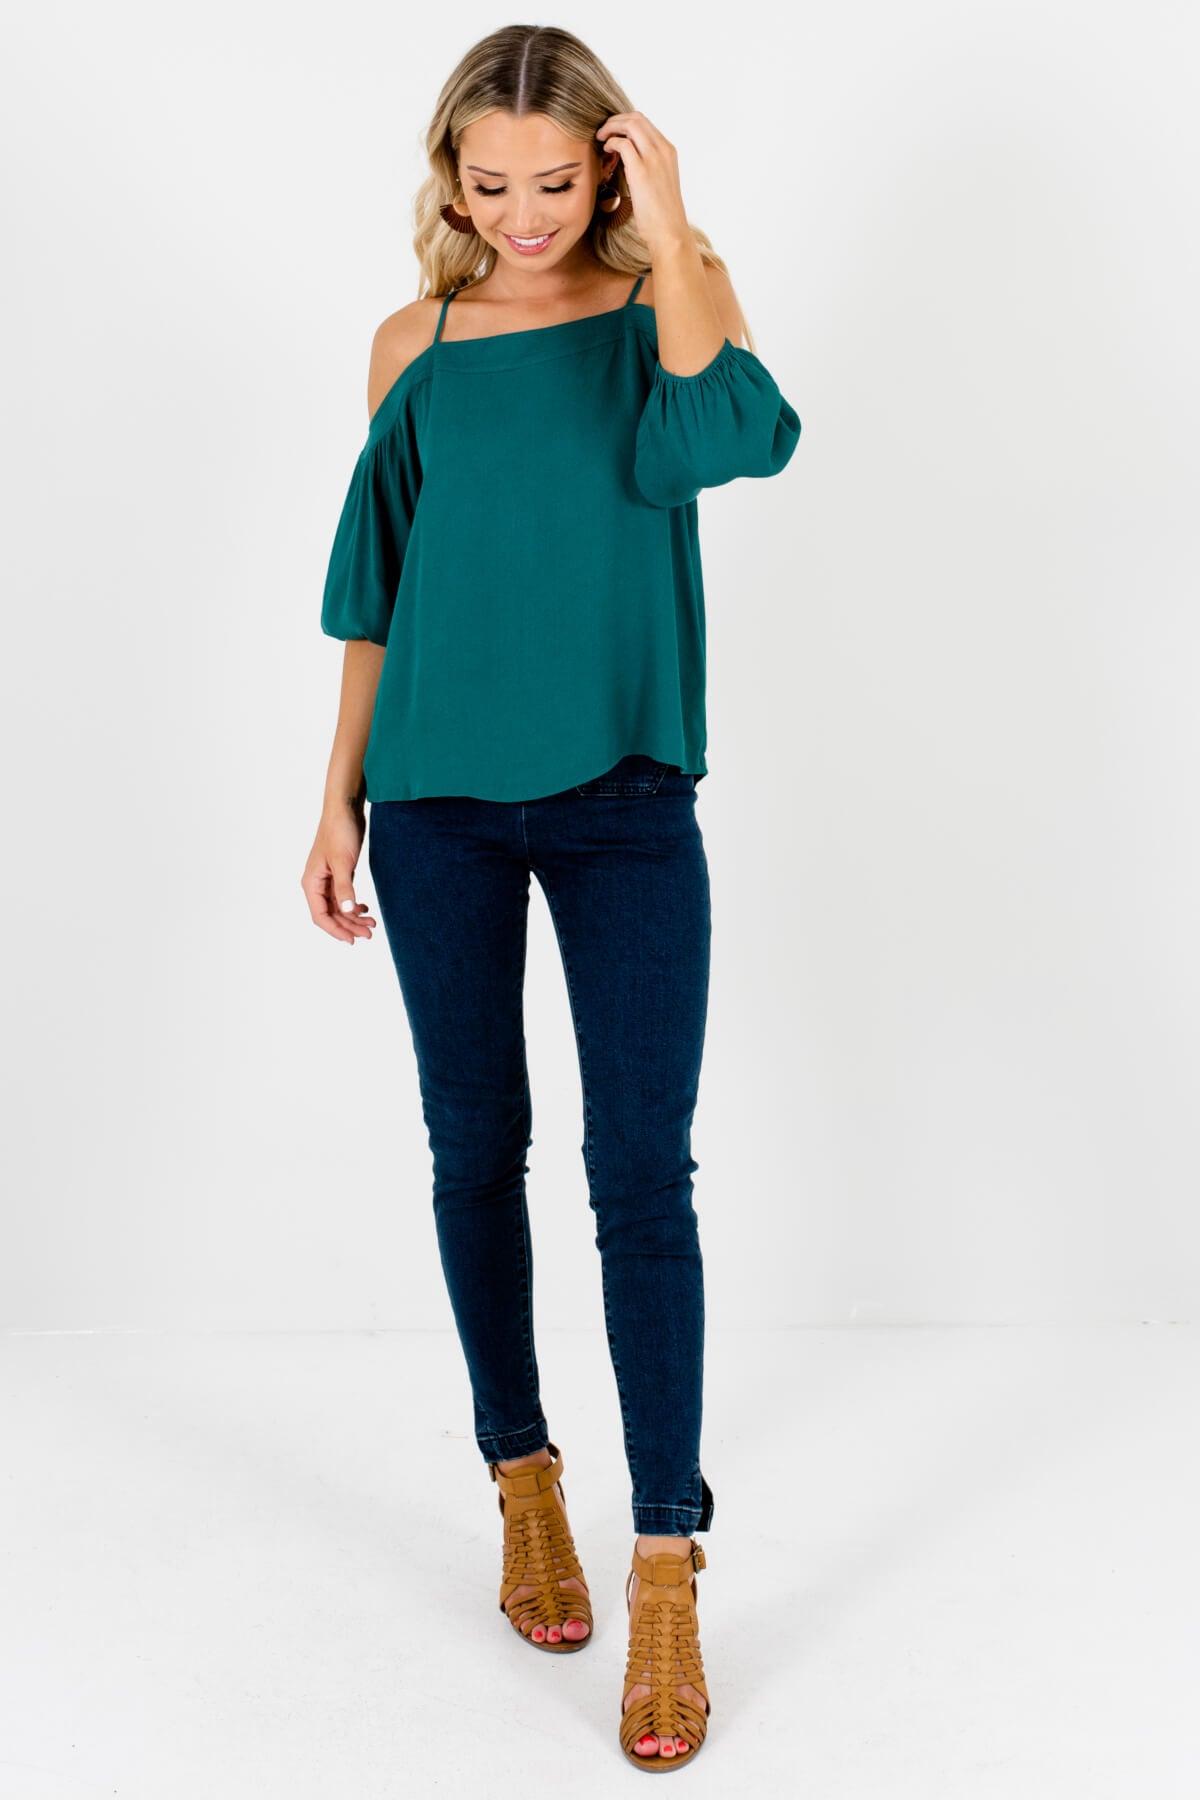 Women's Teal Green Spring and Summertime Boutique Clothing